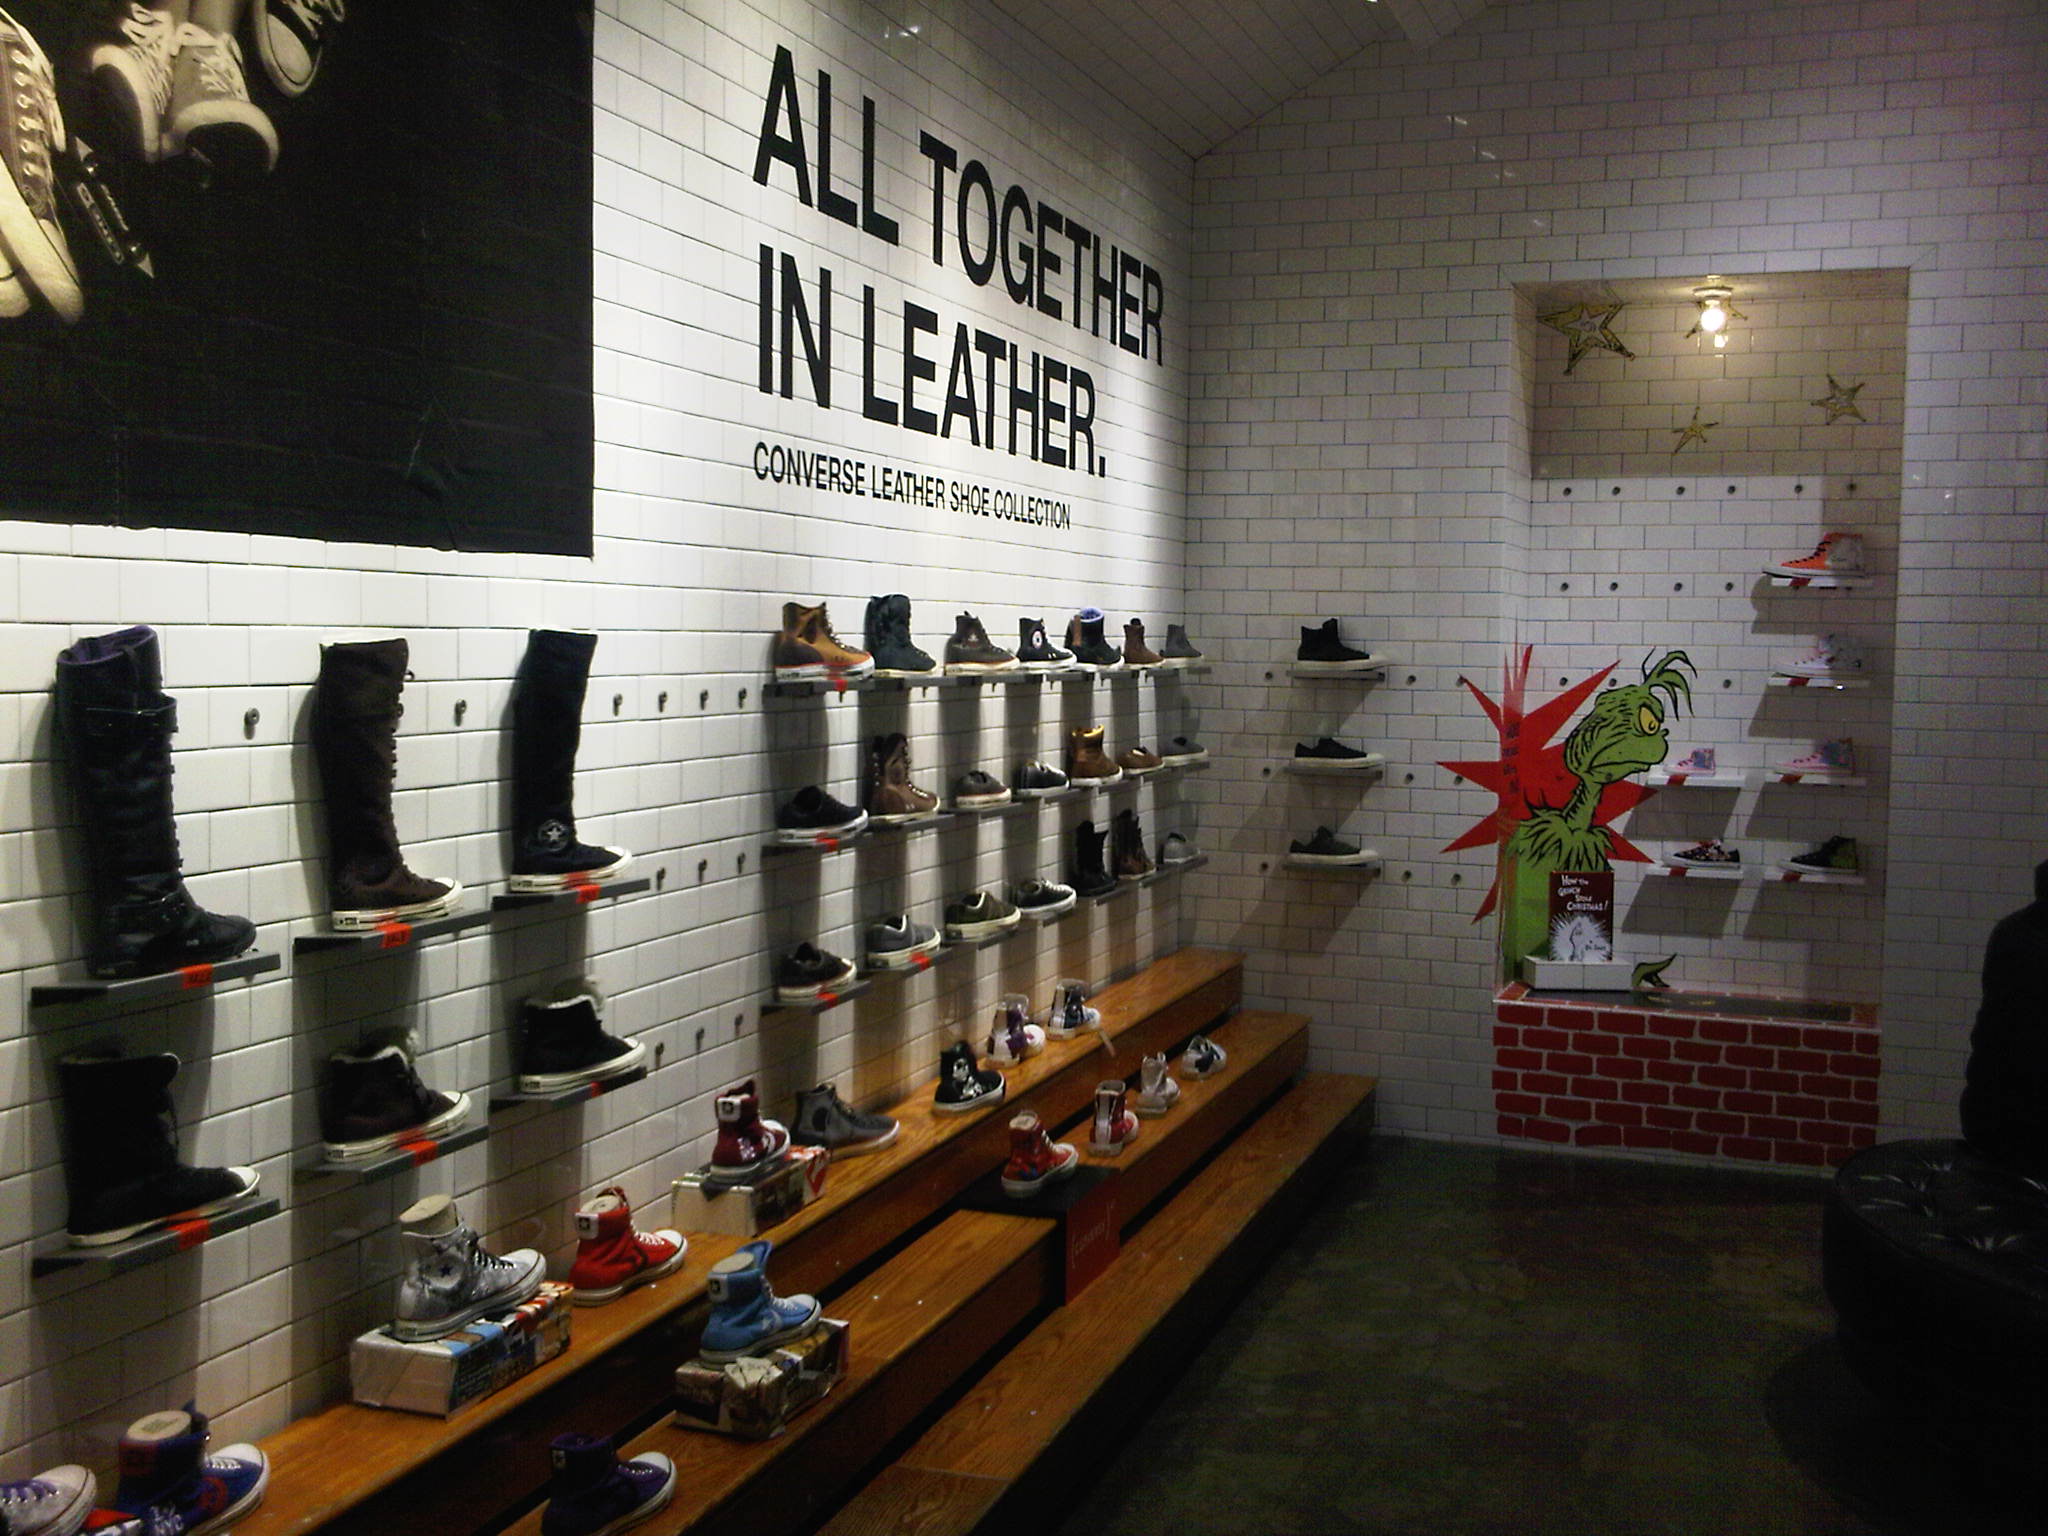 all star store